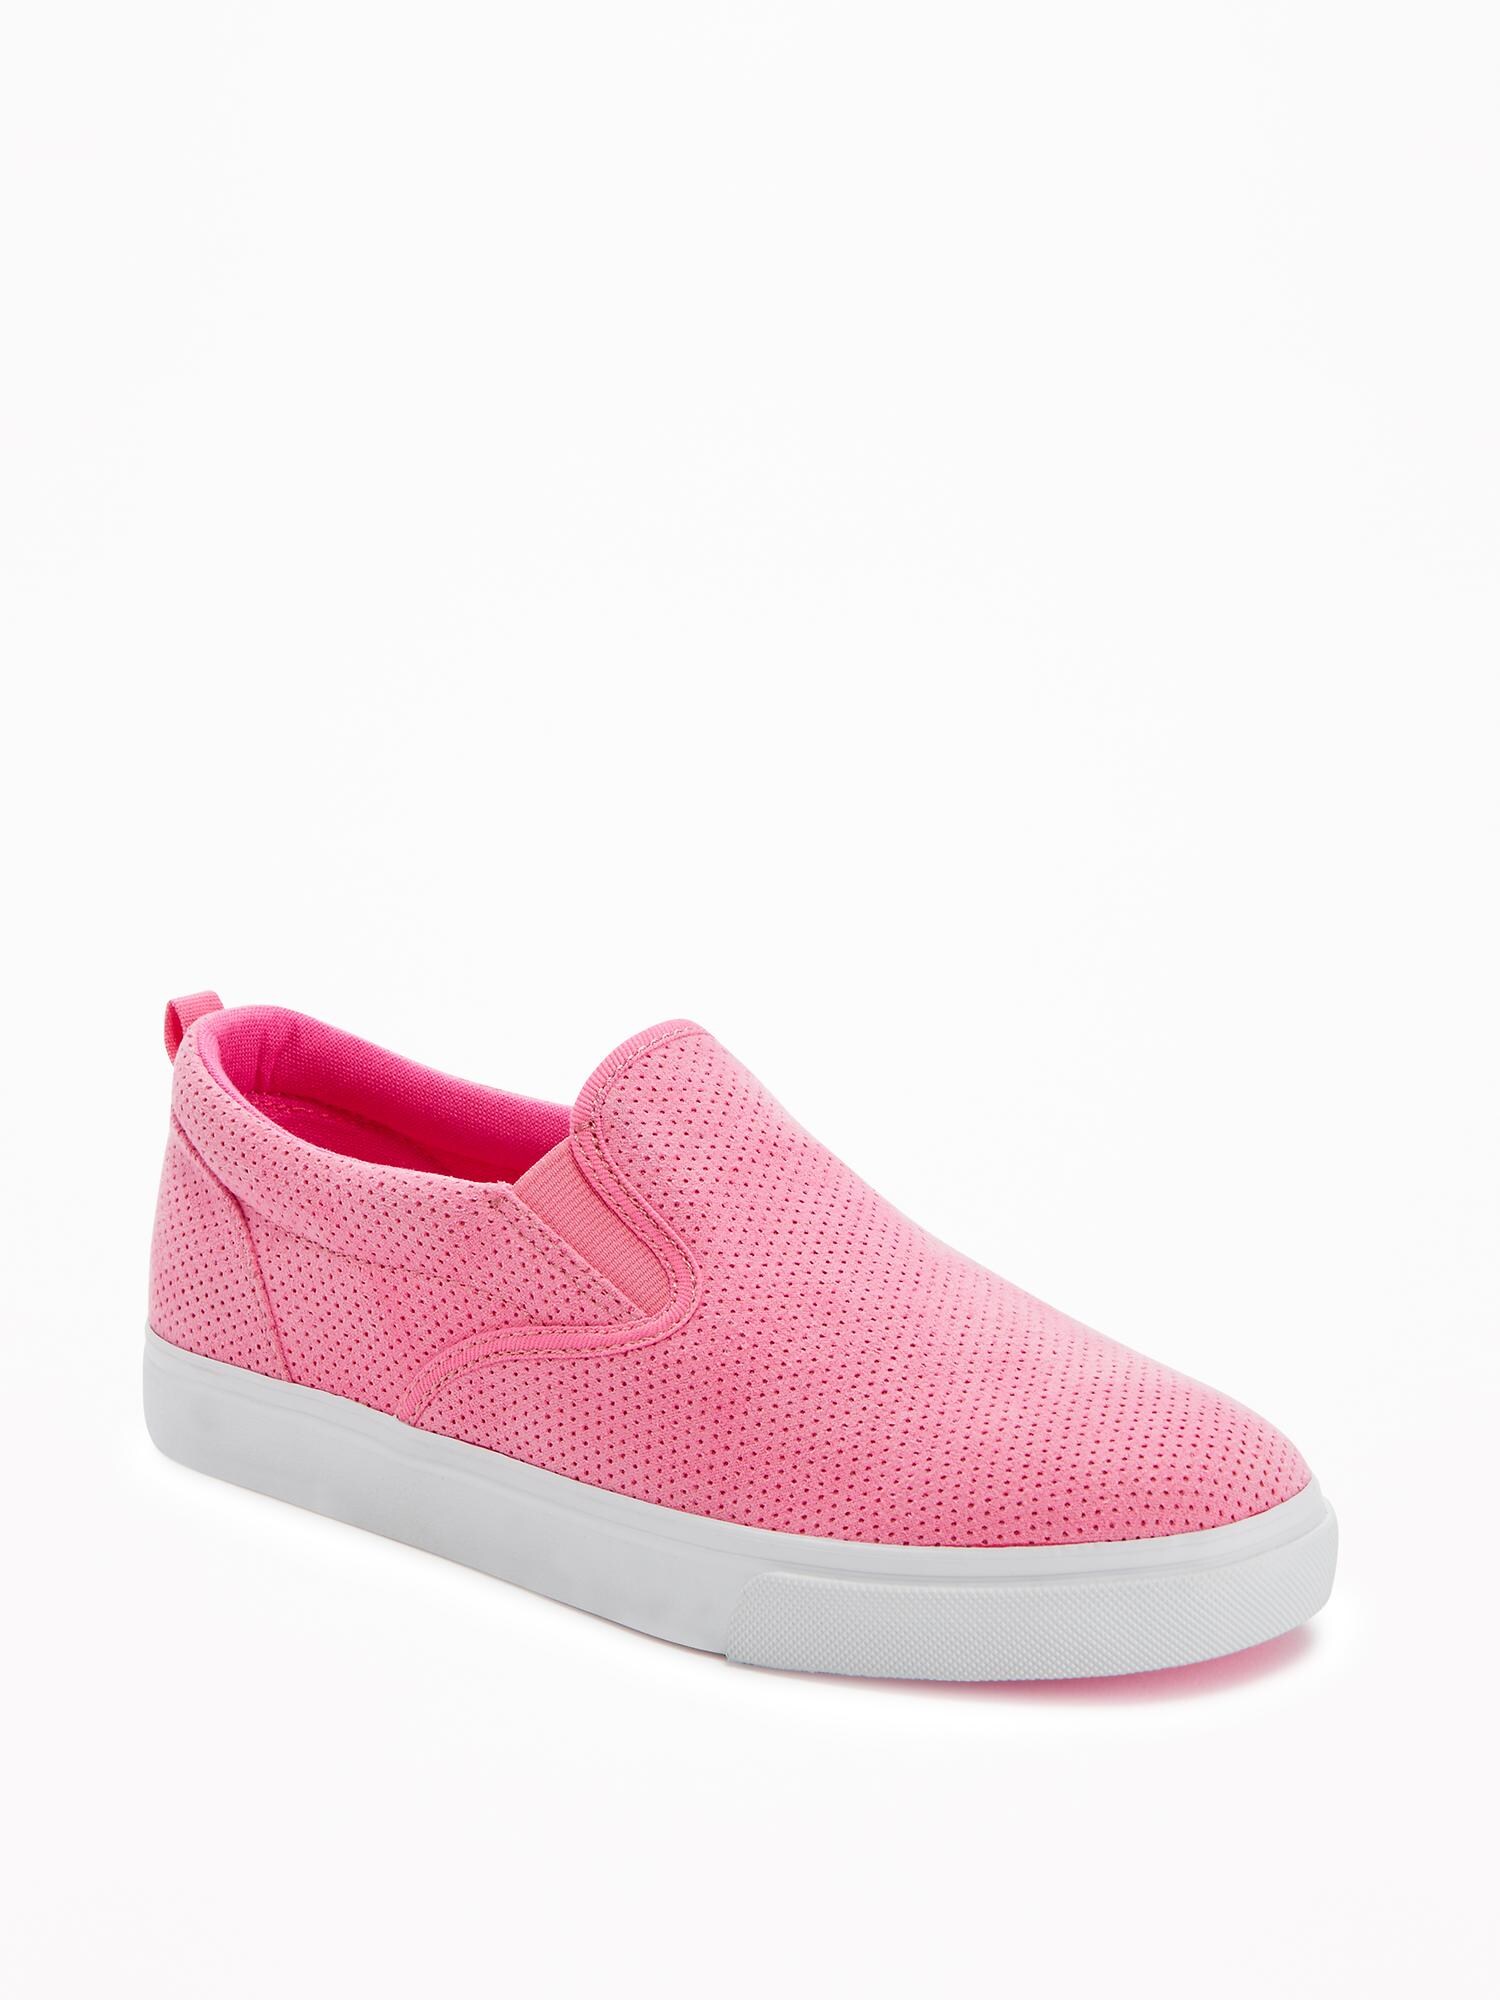 Sueded Perforated Slip-Ons for Girls | Old Navy